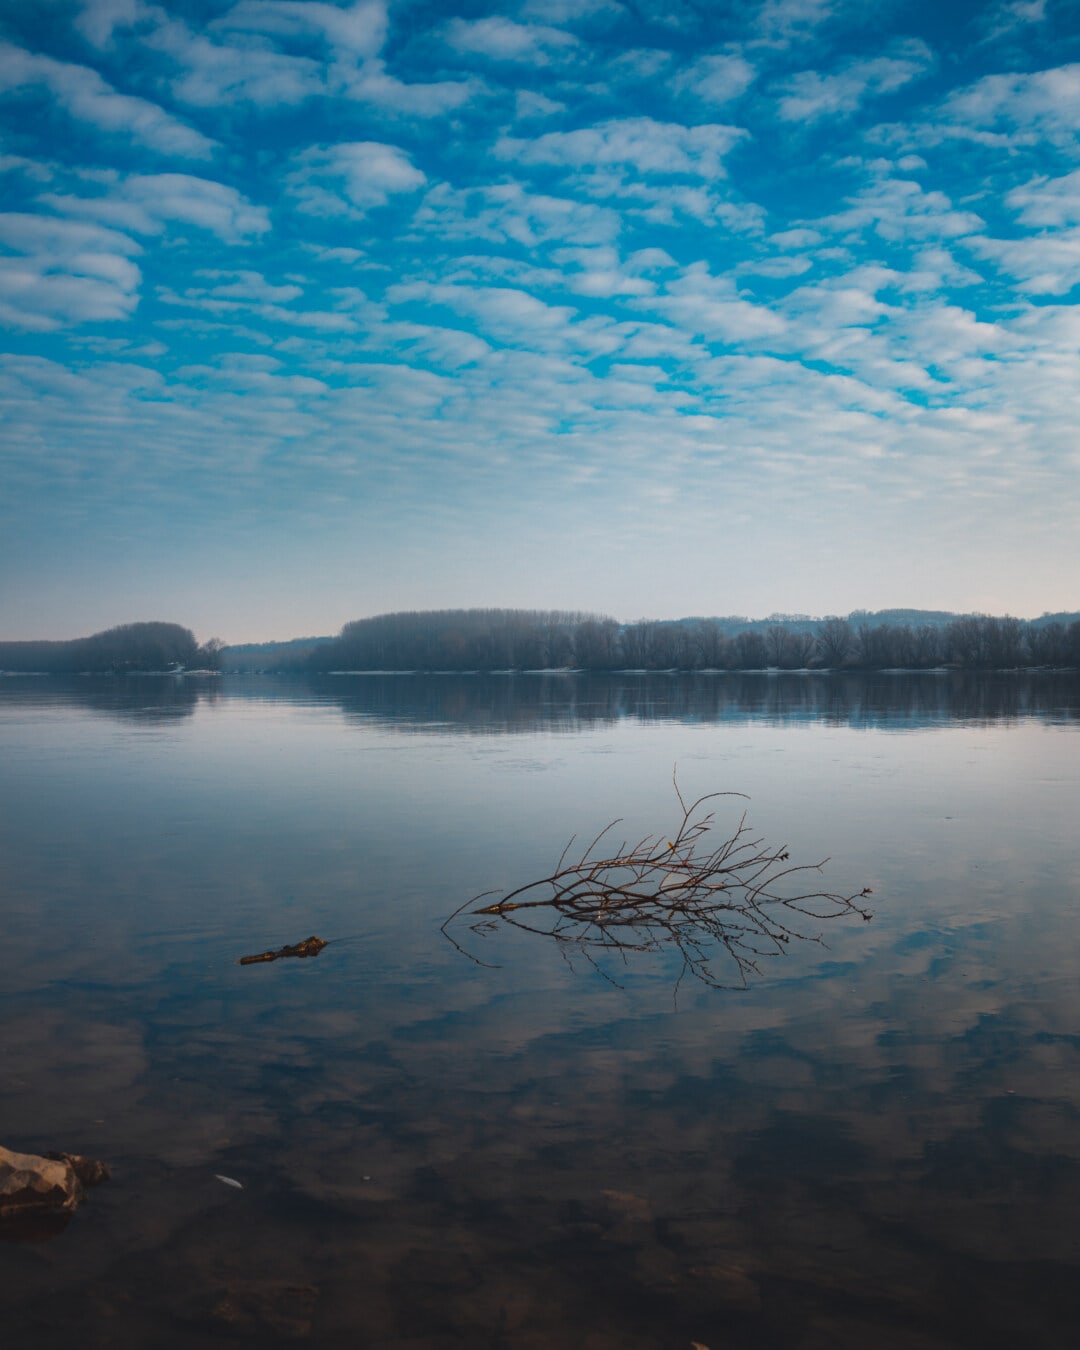 dark blue, blue sky, cloudiness, lakeside, cloudy, water level, driftwood, lake, landscape, water